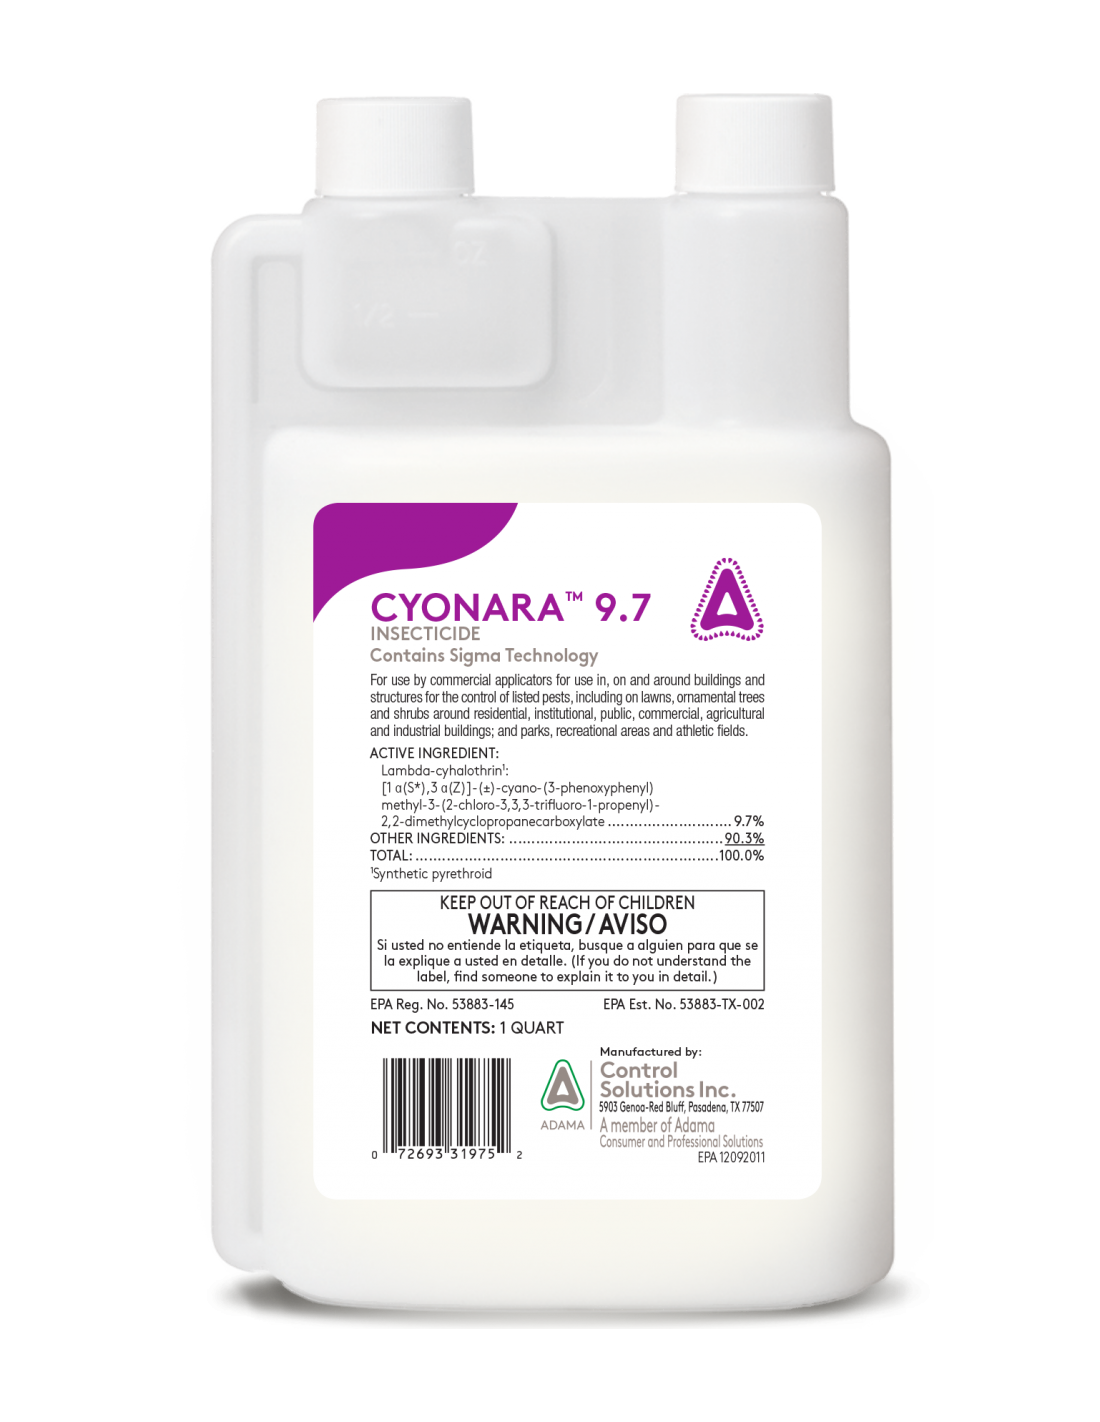 Cyonara 9.7 Insecticide Questions & Answers